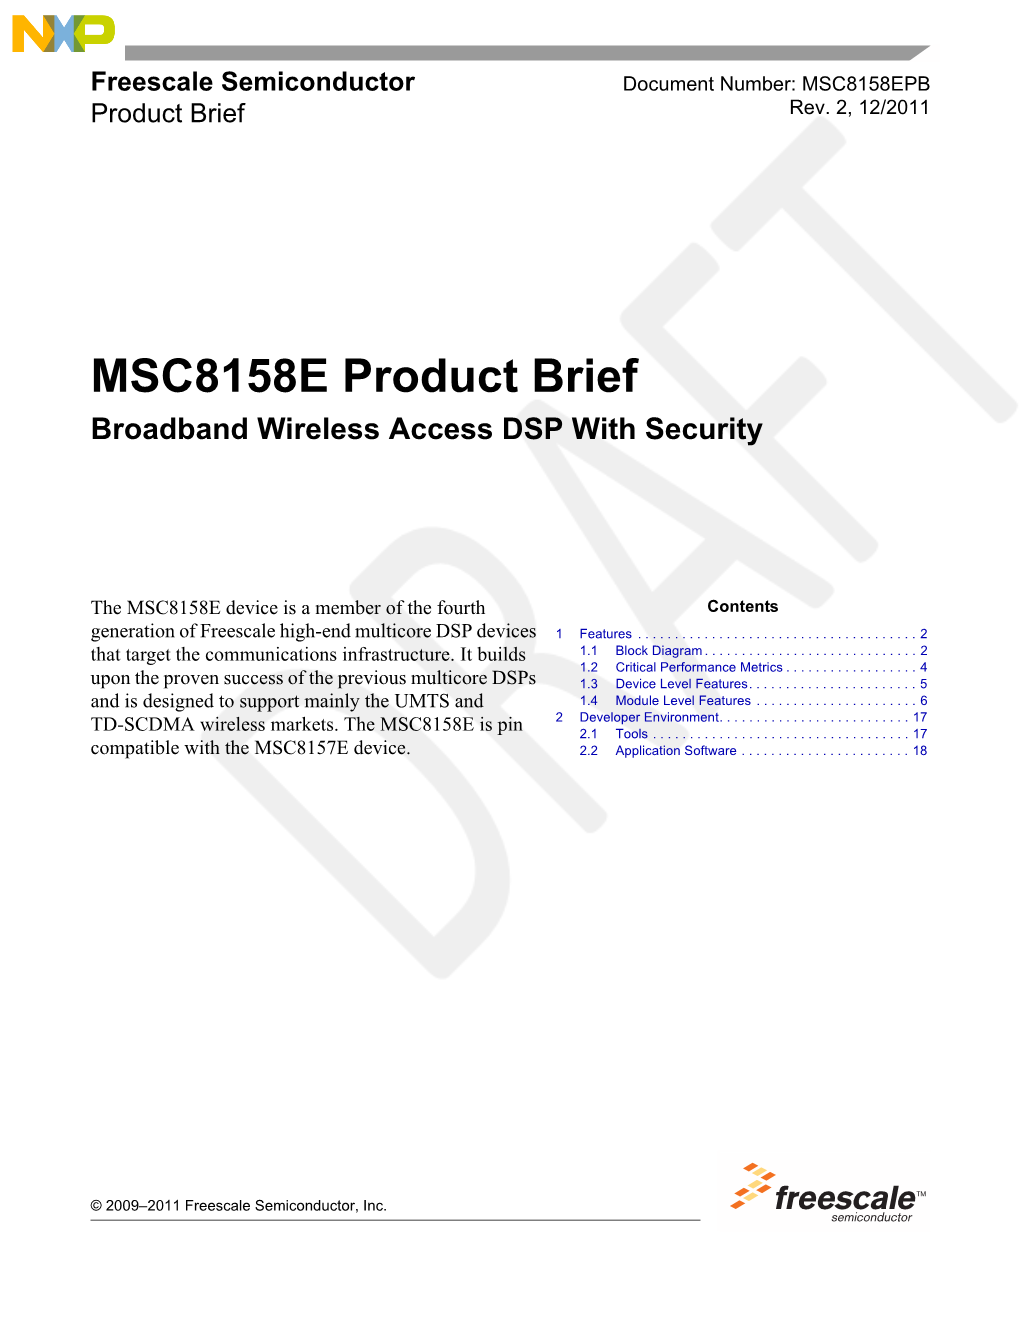 MSC8158E Product Brief Broadband Wireless Access DSP with Security